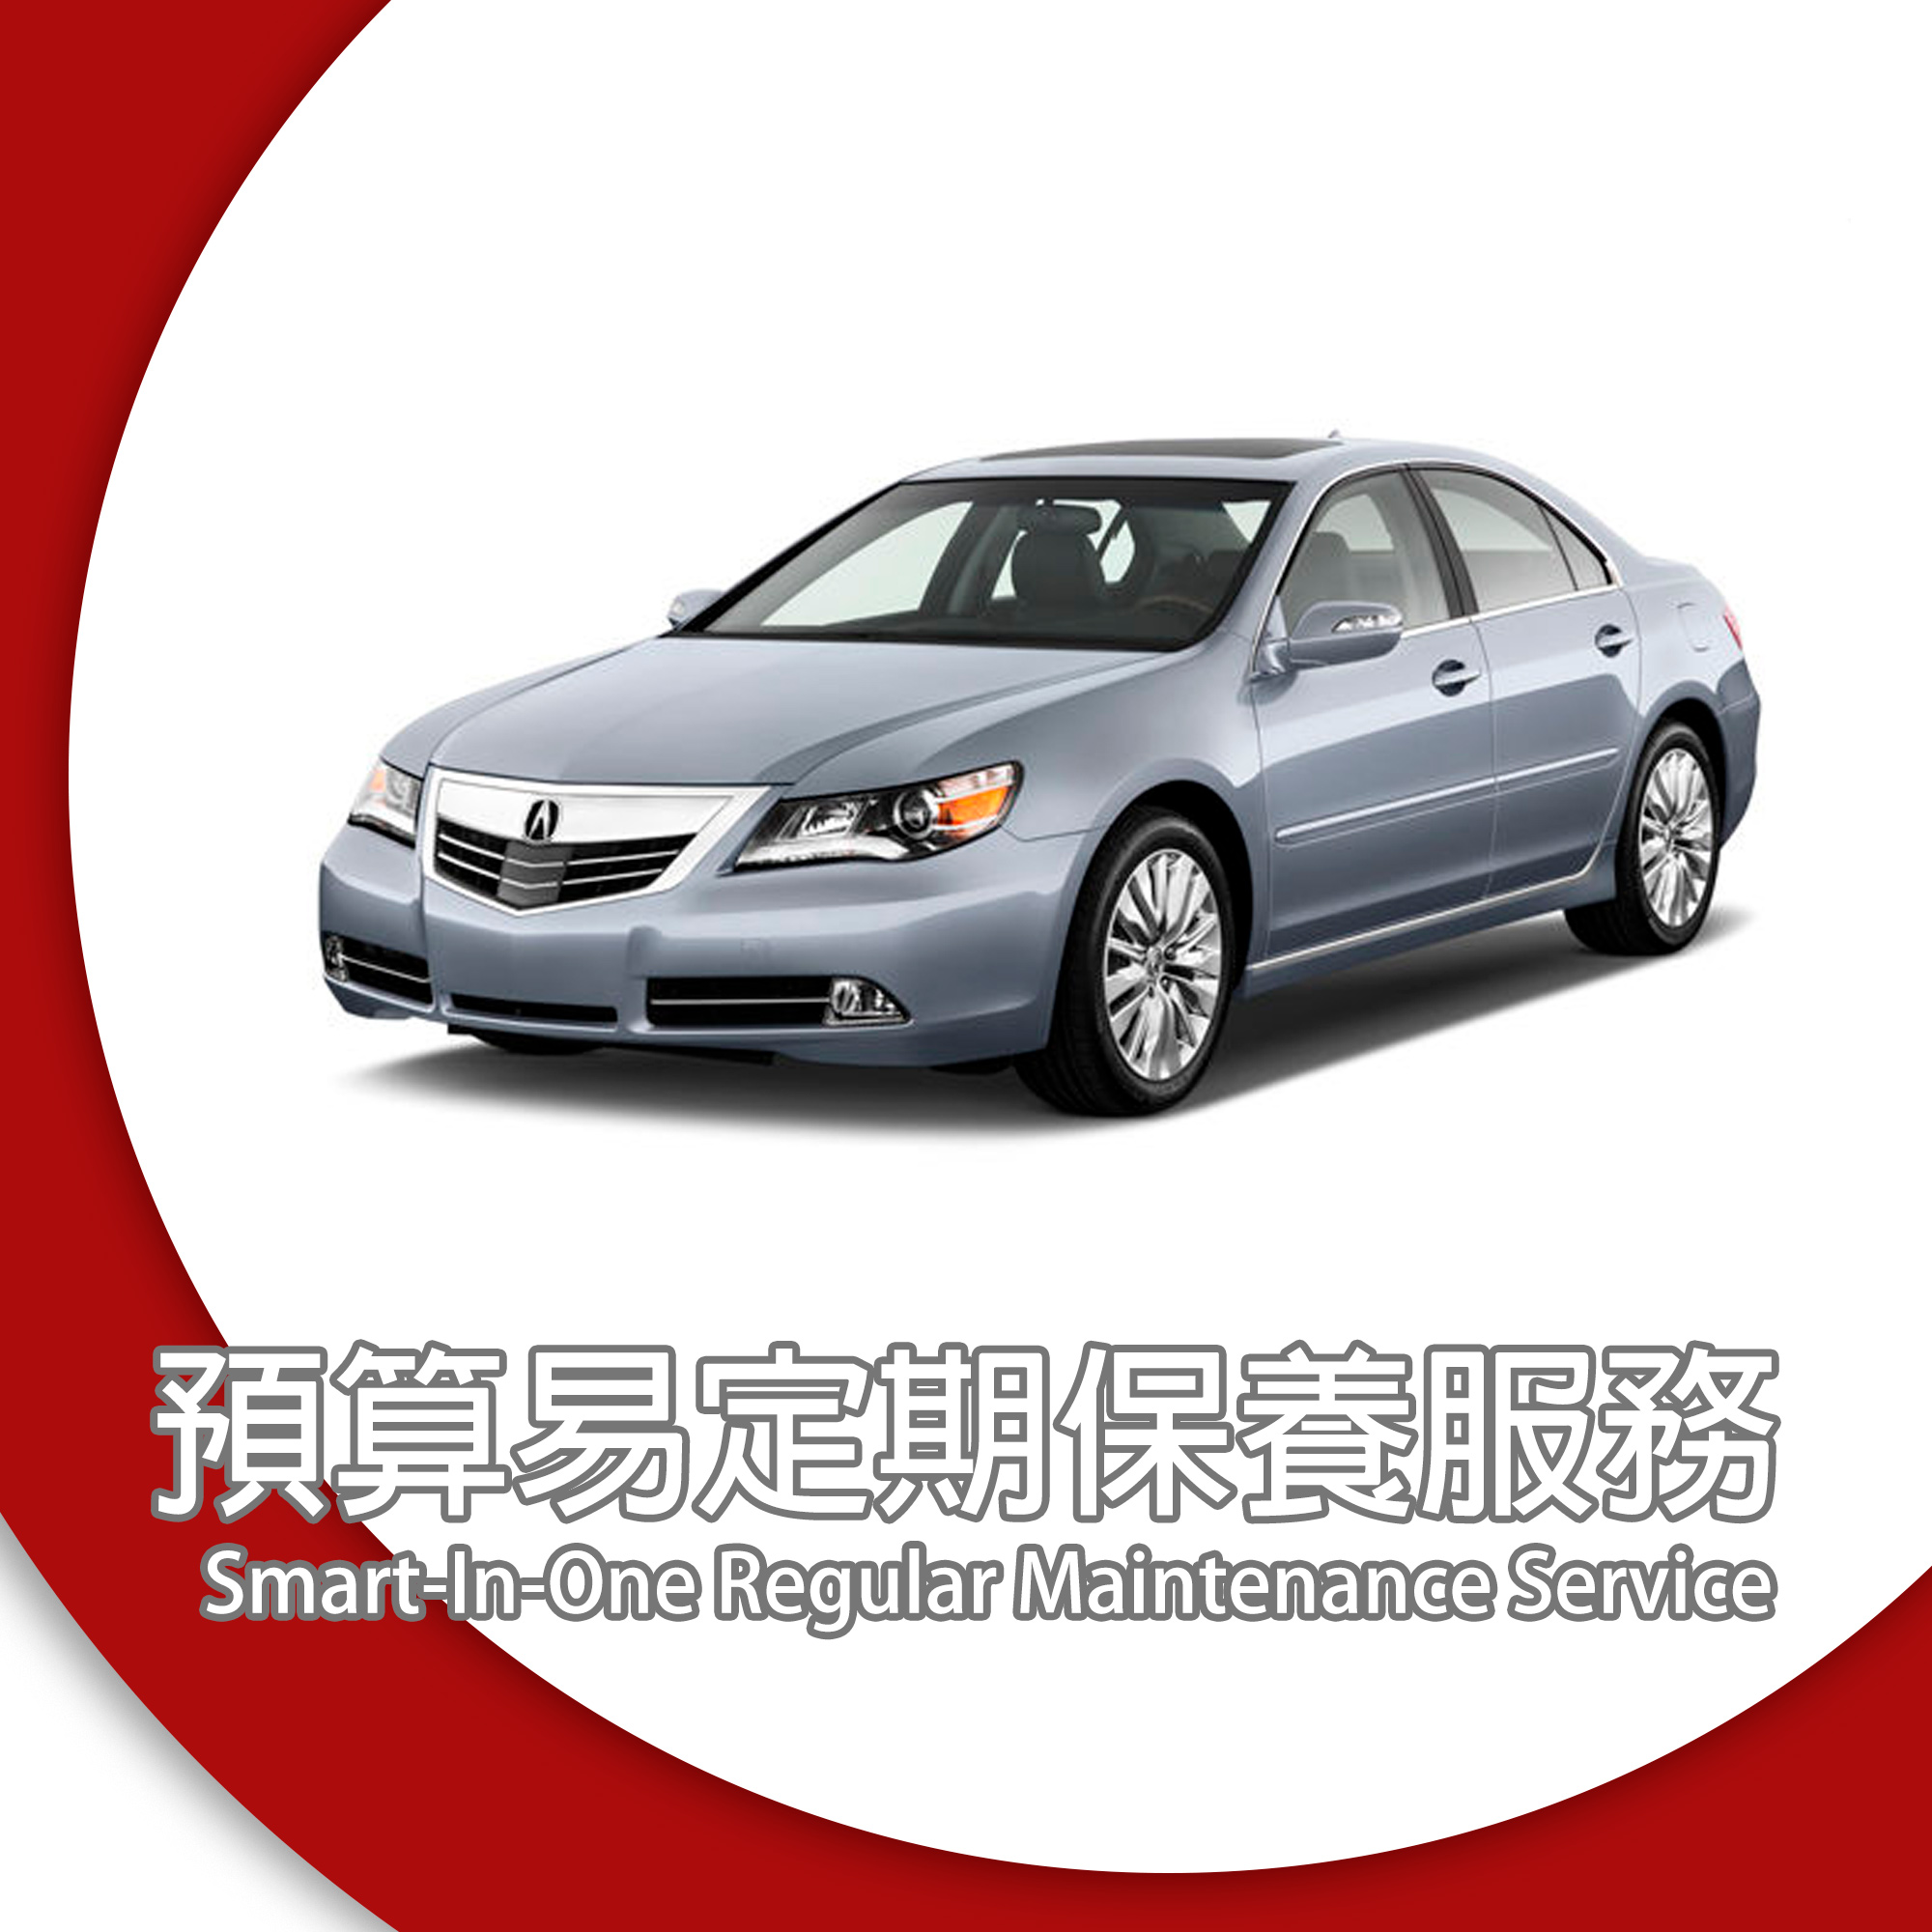 Acura 3.5RL - Stand Maintenance Package Coupons 2 Set Early Bird Discount (Vehicle Age 37-72 Months)